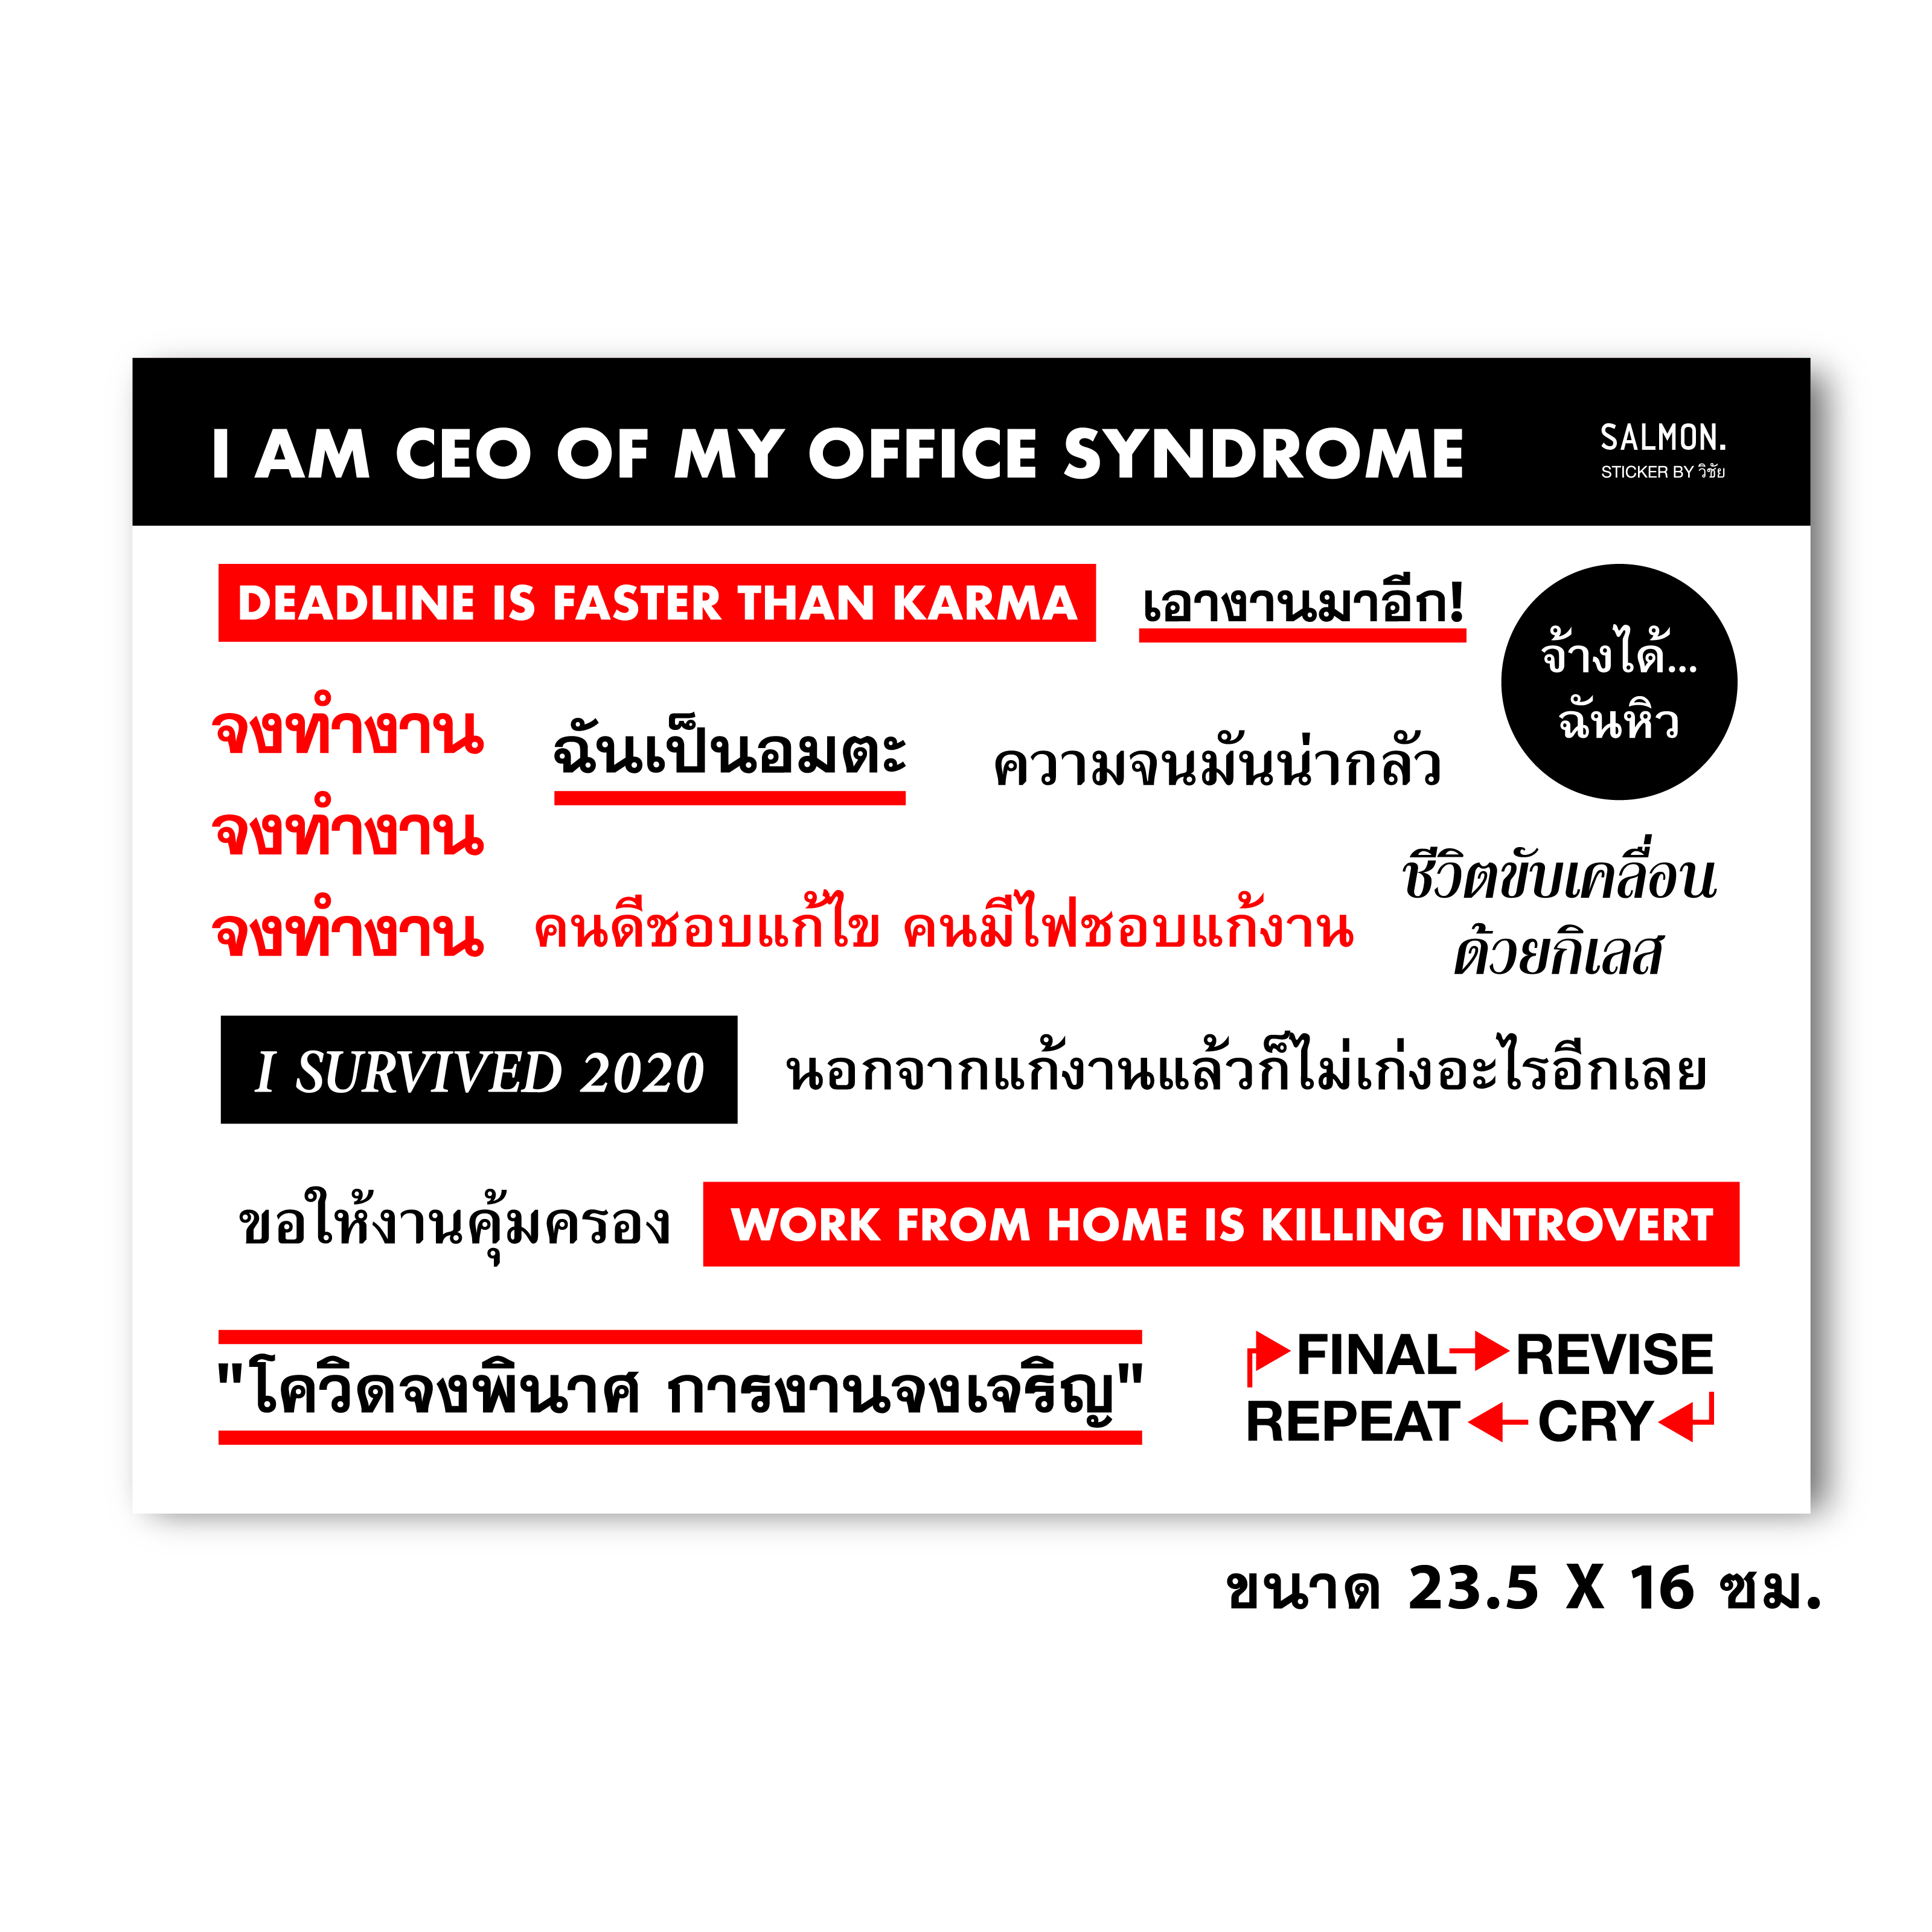  ‘I AM CEO OF MY OFFICE SYNDROME’ STICKER